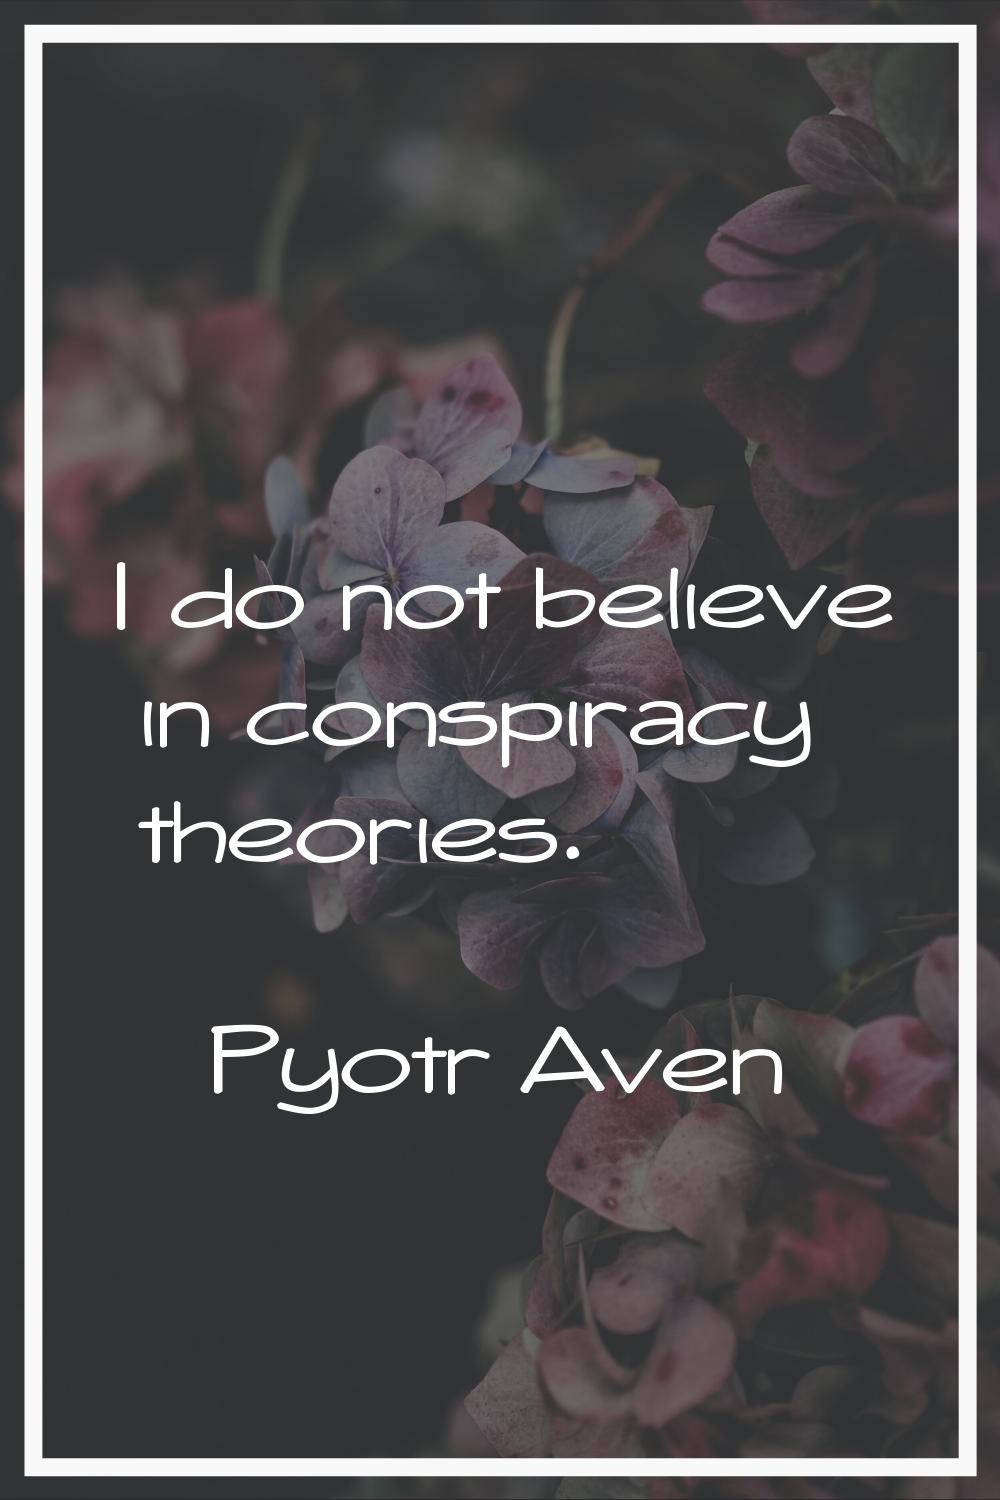 I do not believe in conspiracy theories.